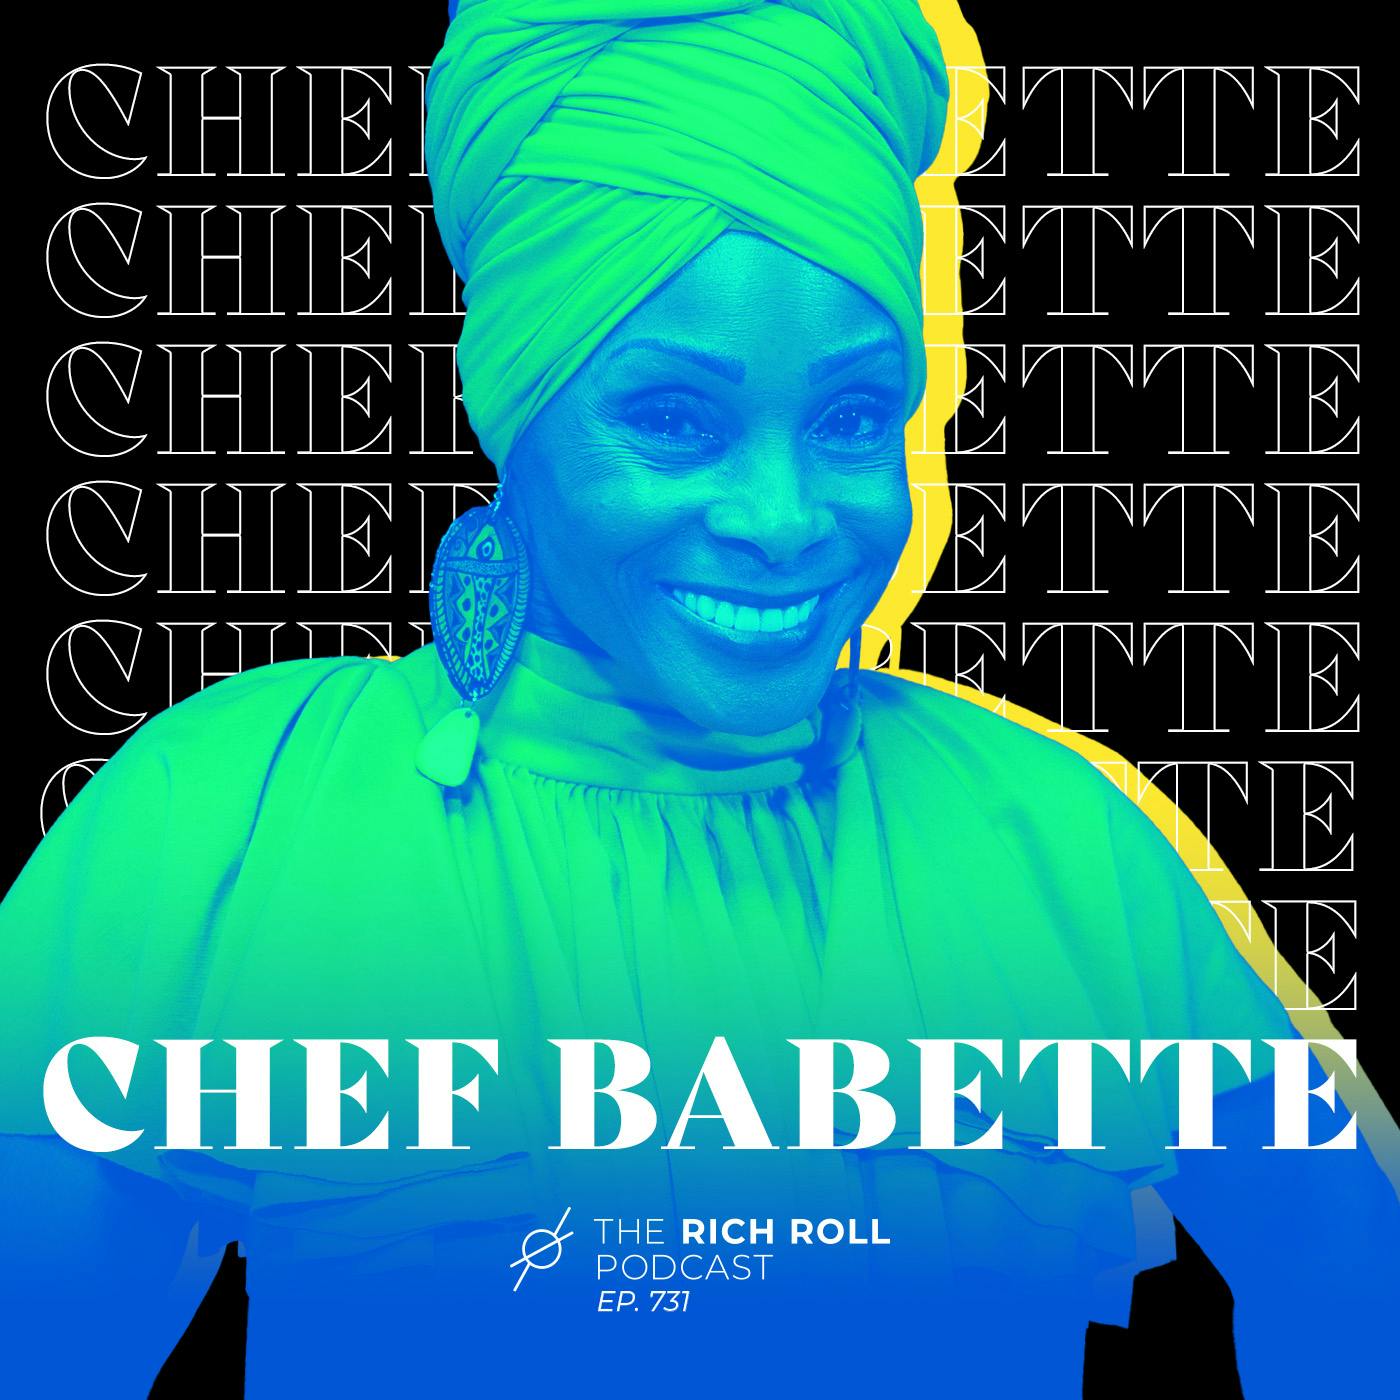 Chef Babette: Fit at 72, Self-Love & Life Transformation Through Food